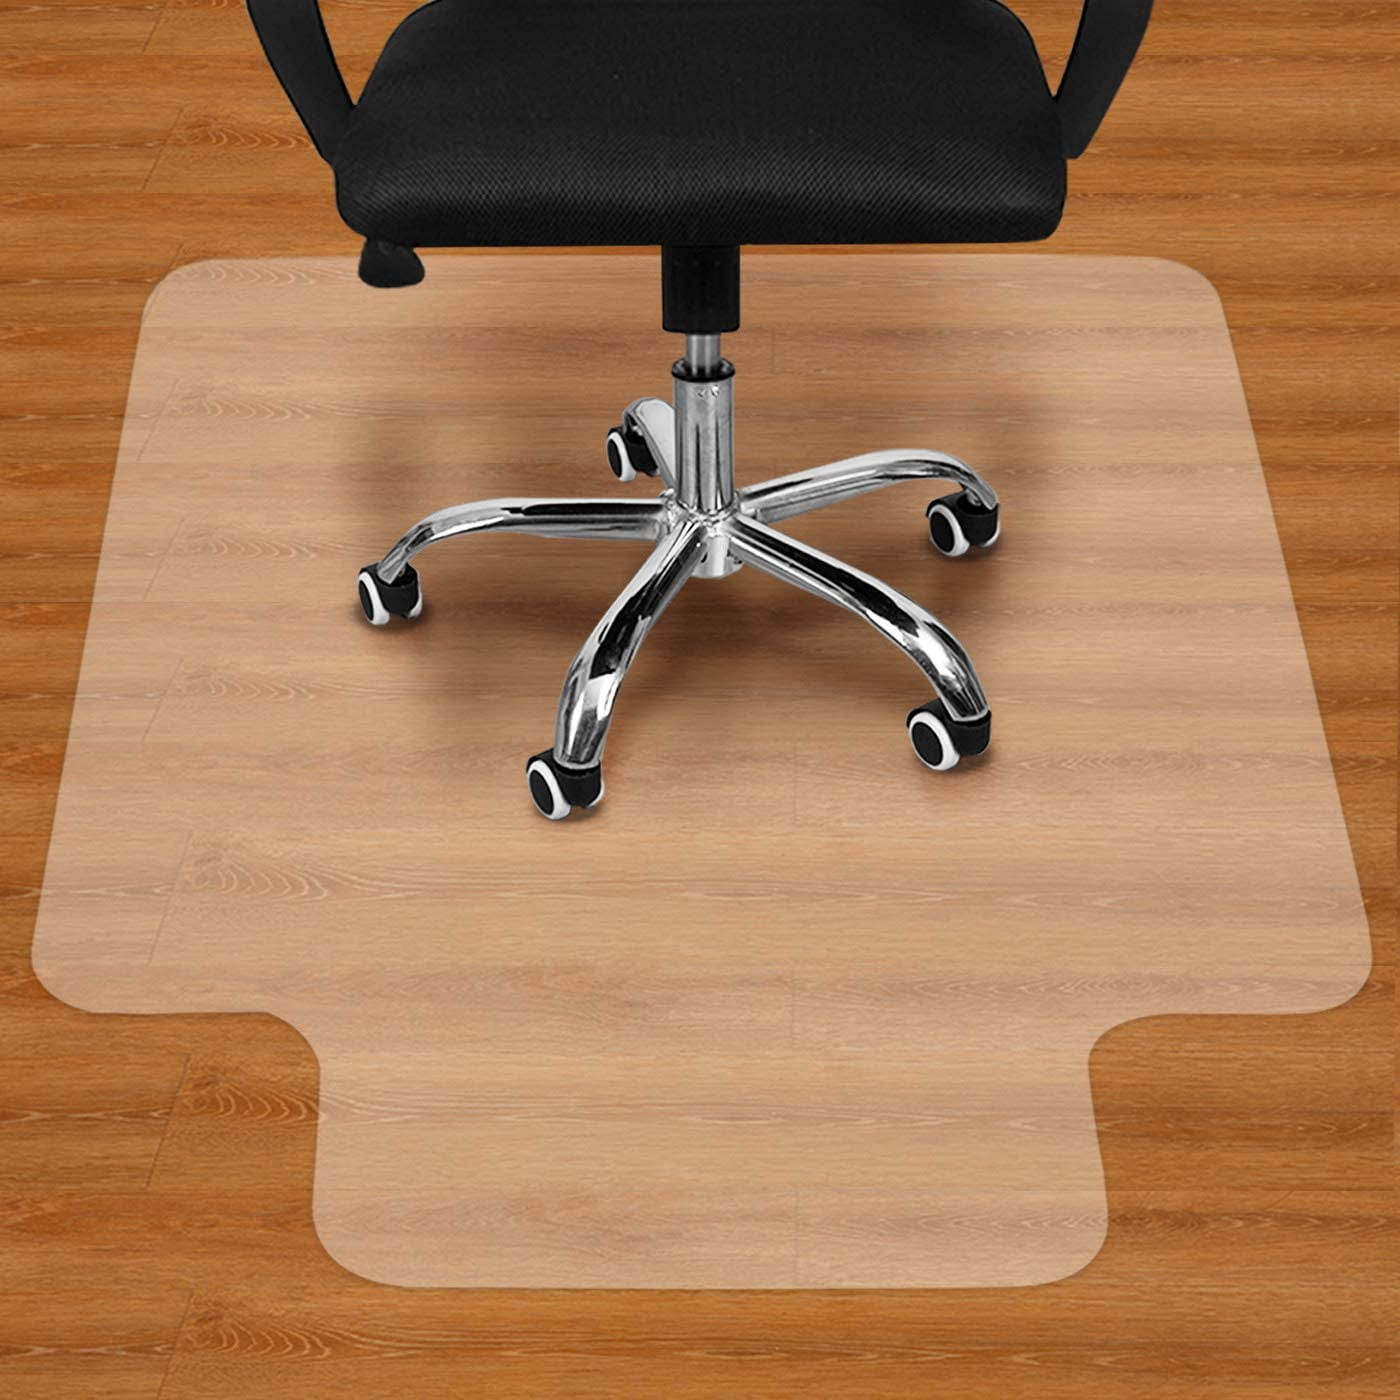 Clear PVC Matte Chair Floor Mat Rolling Chair Protector For Hard Wood Floors 